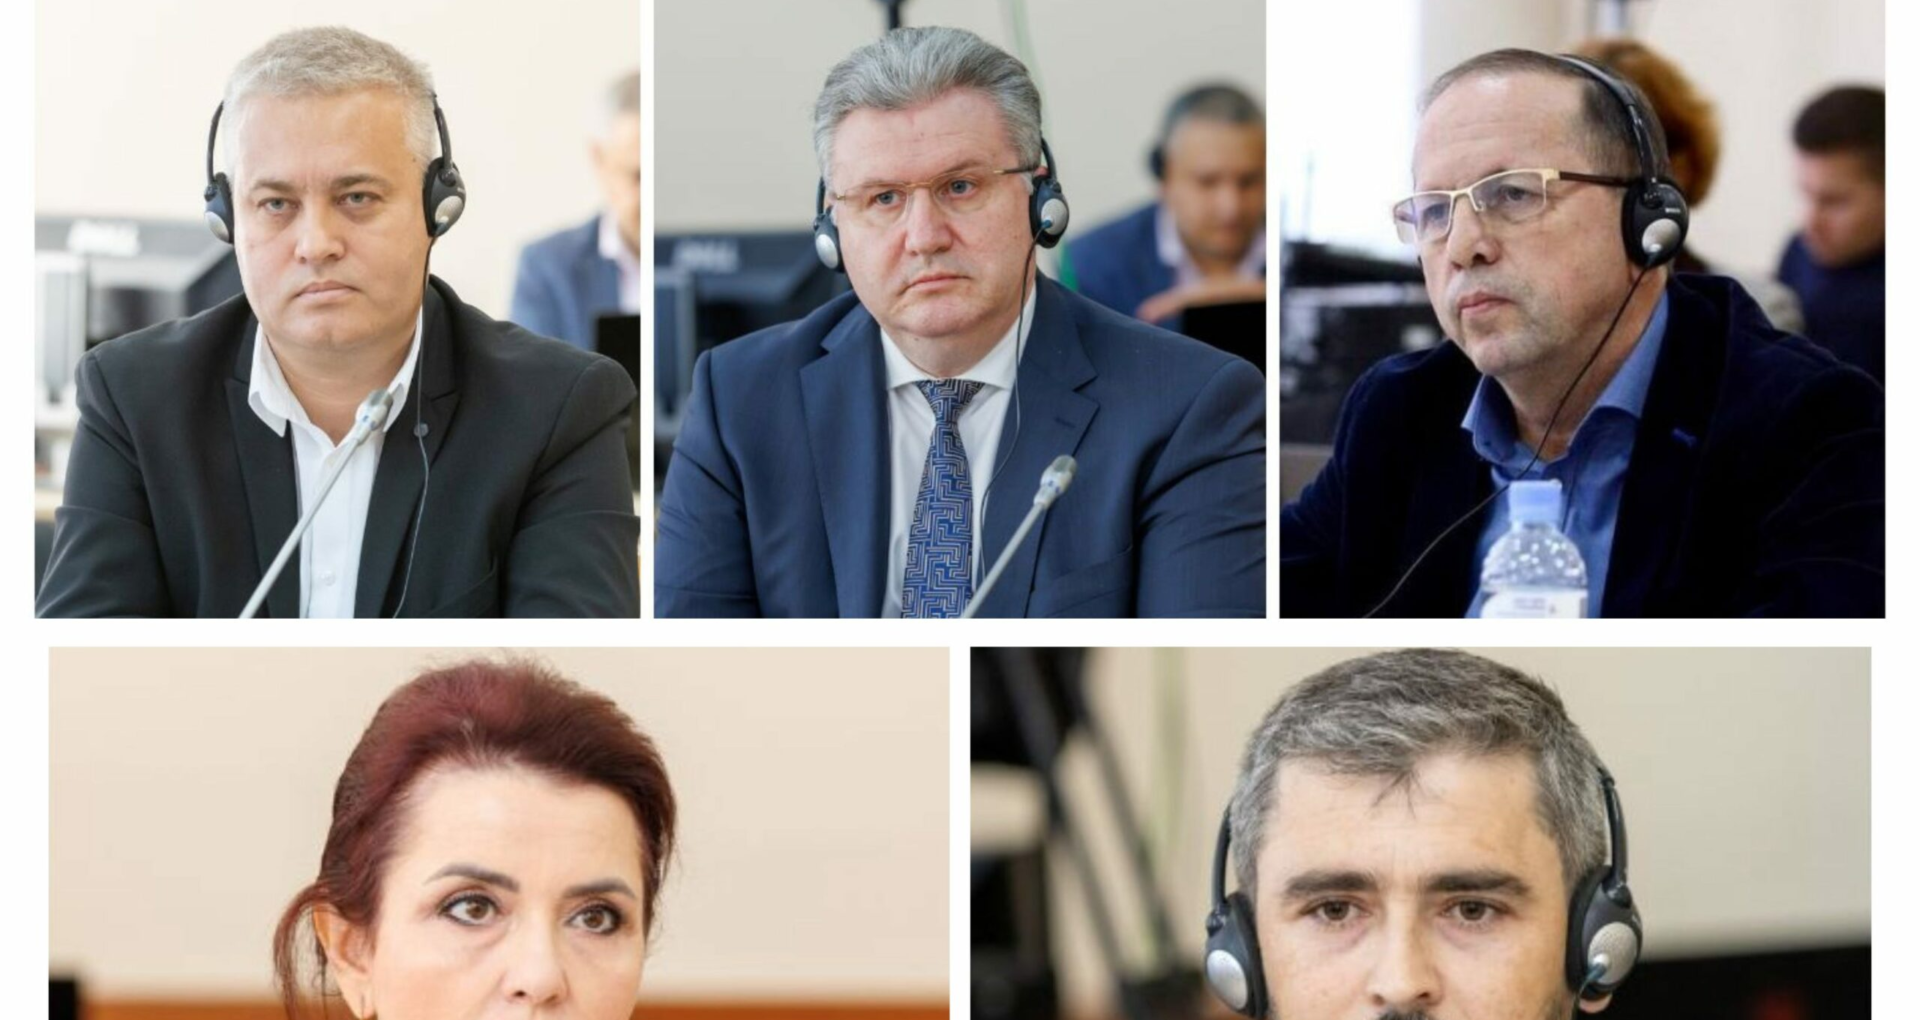 Requests for the resignation of judges from the Supreme Court of Justice suspended by the Commission for Exceptional Situations for 30 days “in order to ensure the functionality of the institution”